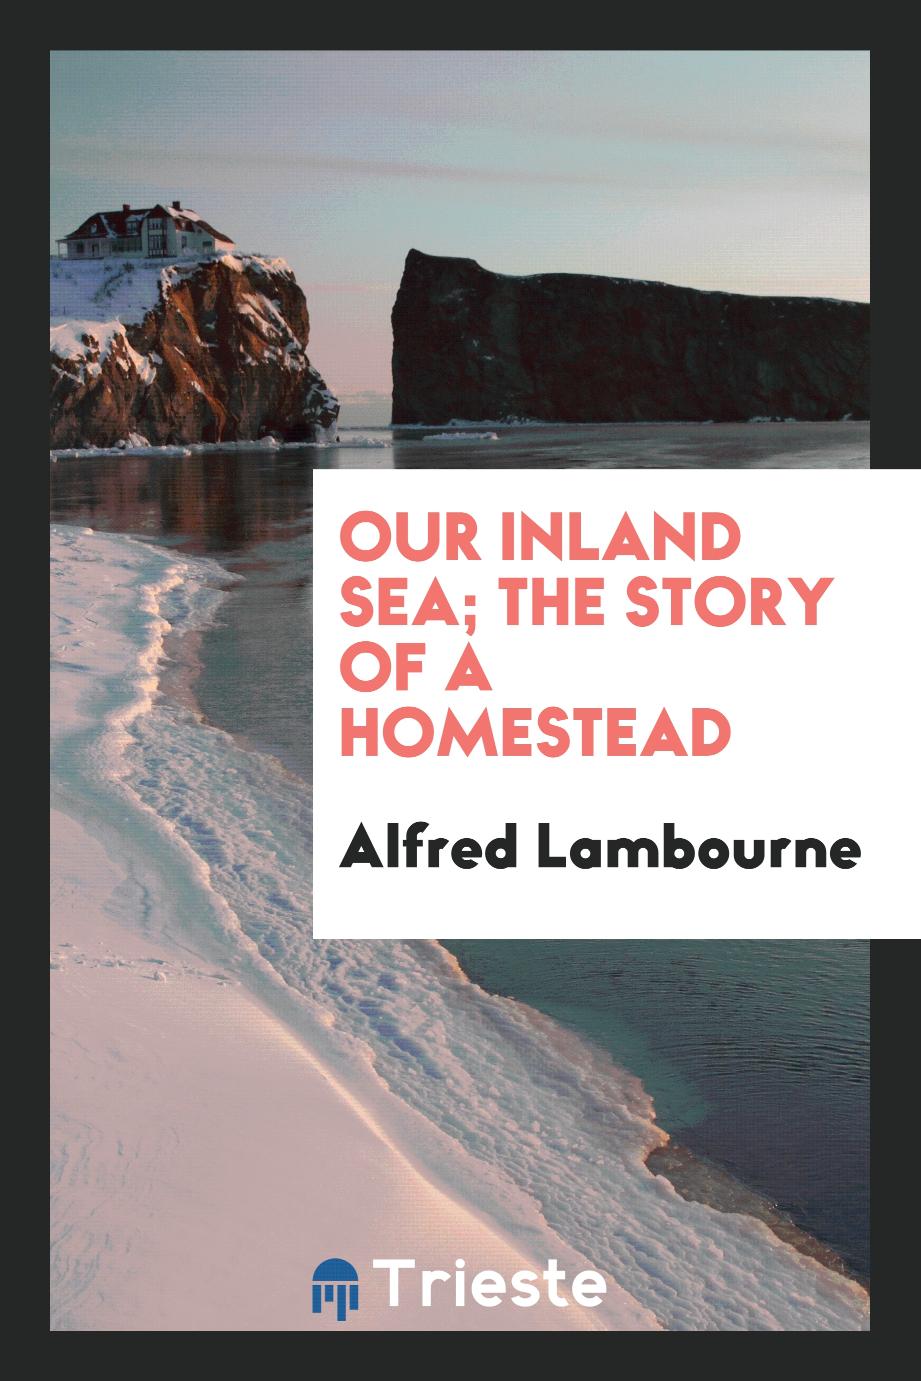 Our inland sea; the story of a homestead